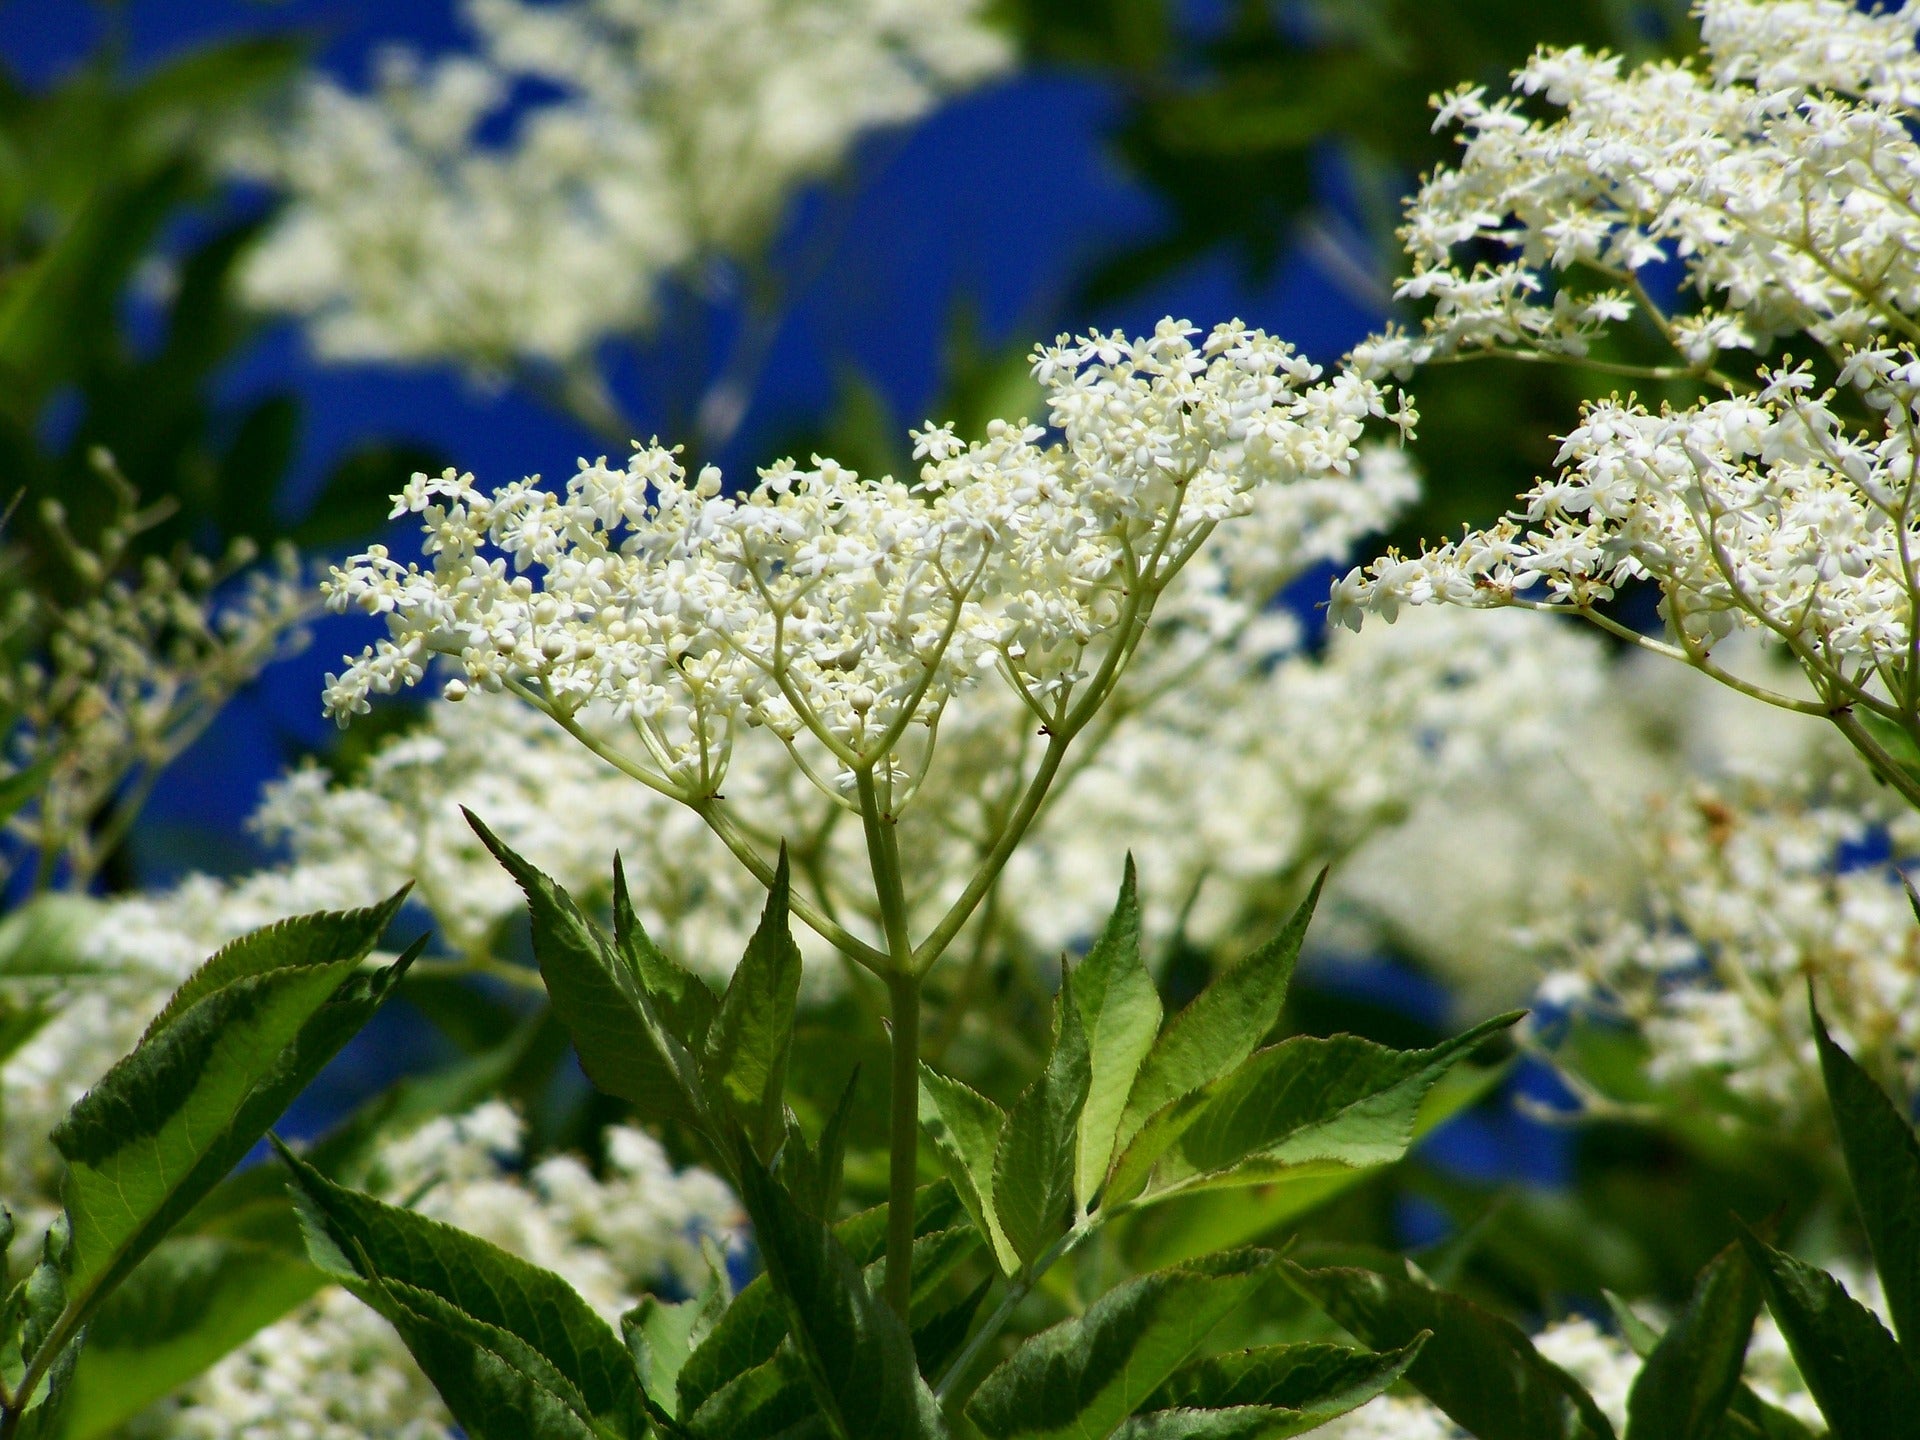 Elderflower’s most recognisable element is its sprawling white flowers